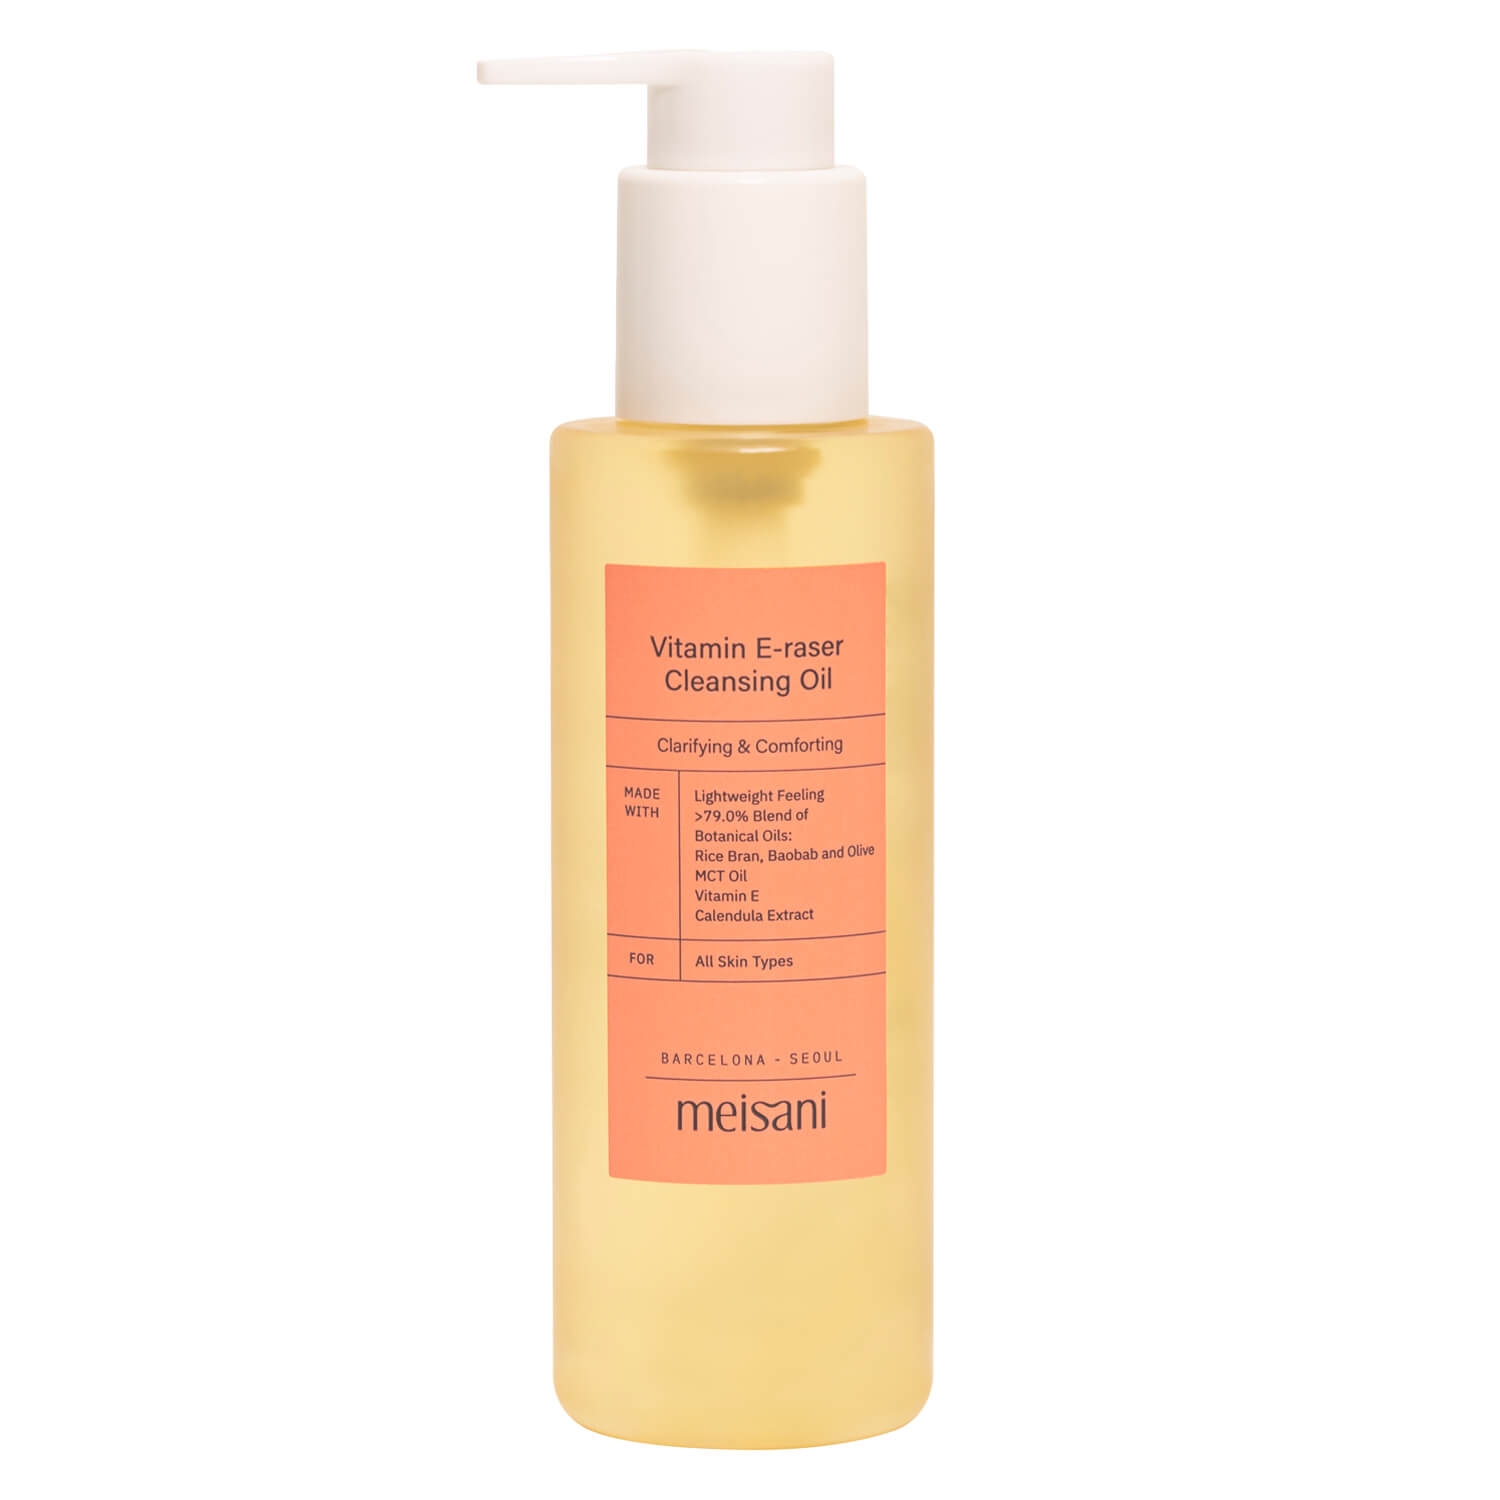 Product image from meisani Vitamin E-raser Cleansing Oil